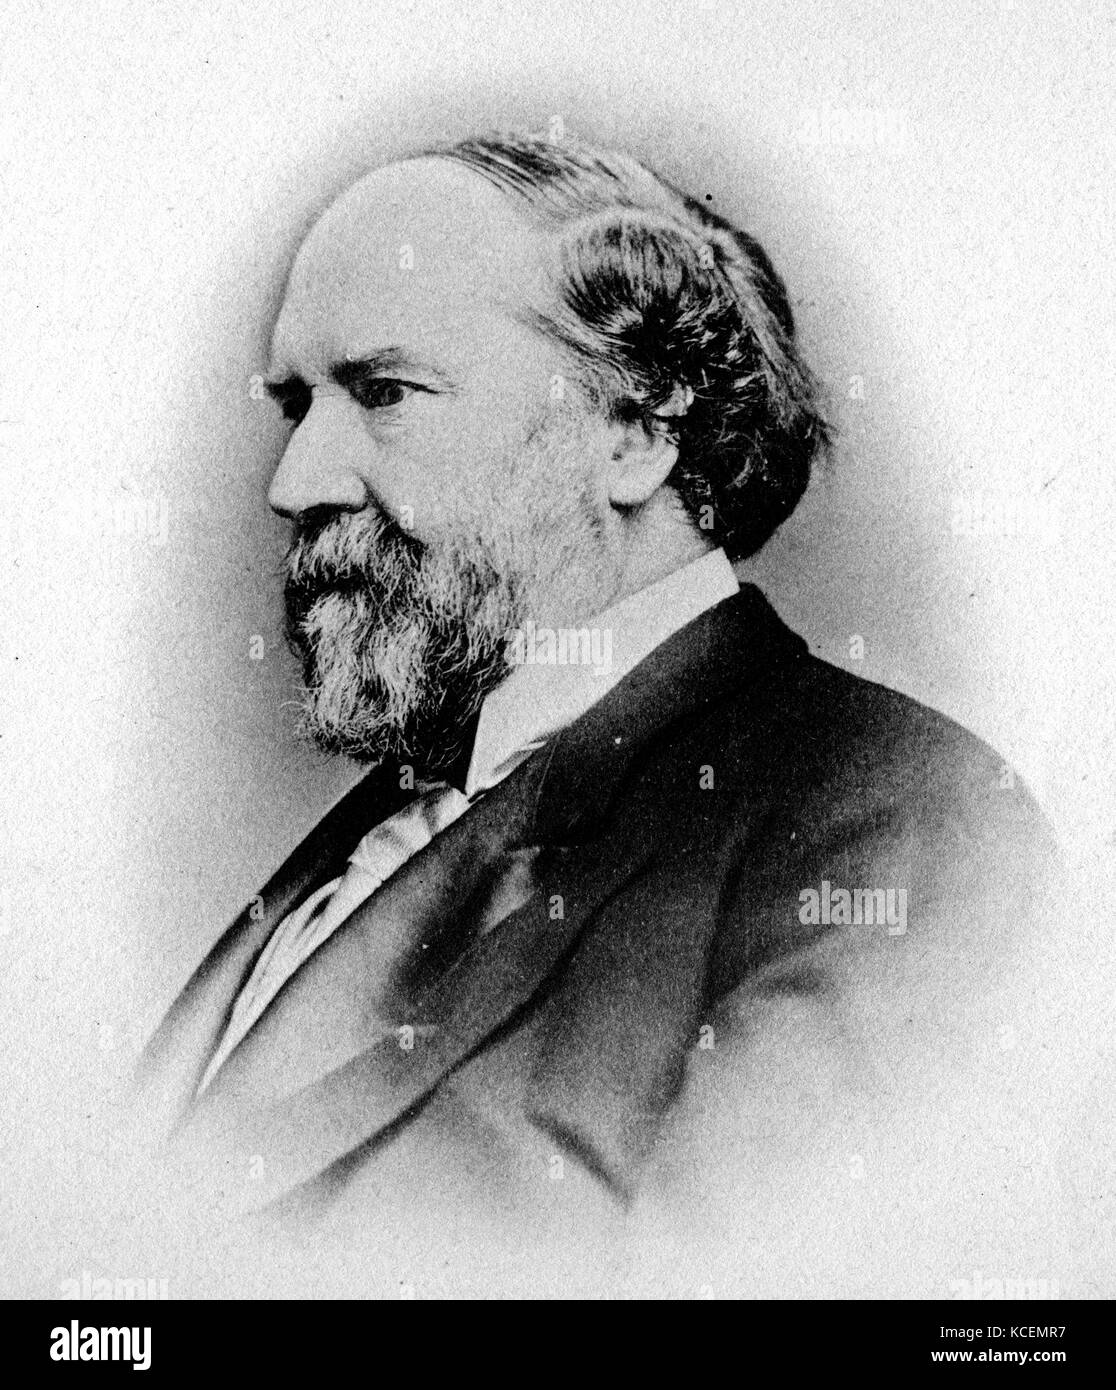 Sir Thomas Grainger Stewart, (1837 – 1900) eminent Scottish physician who served as president of the Royal College of Physicians of Edinburgh (1889–1891), president of the Medico-Chirurgical Society of Edinburgh, president of the medicine section of the British Medical Association, and Physician-in-Ordinary to the Queen for Scotland Stock Photo